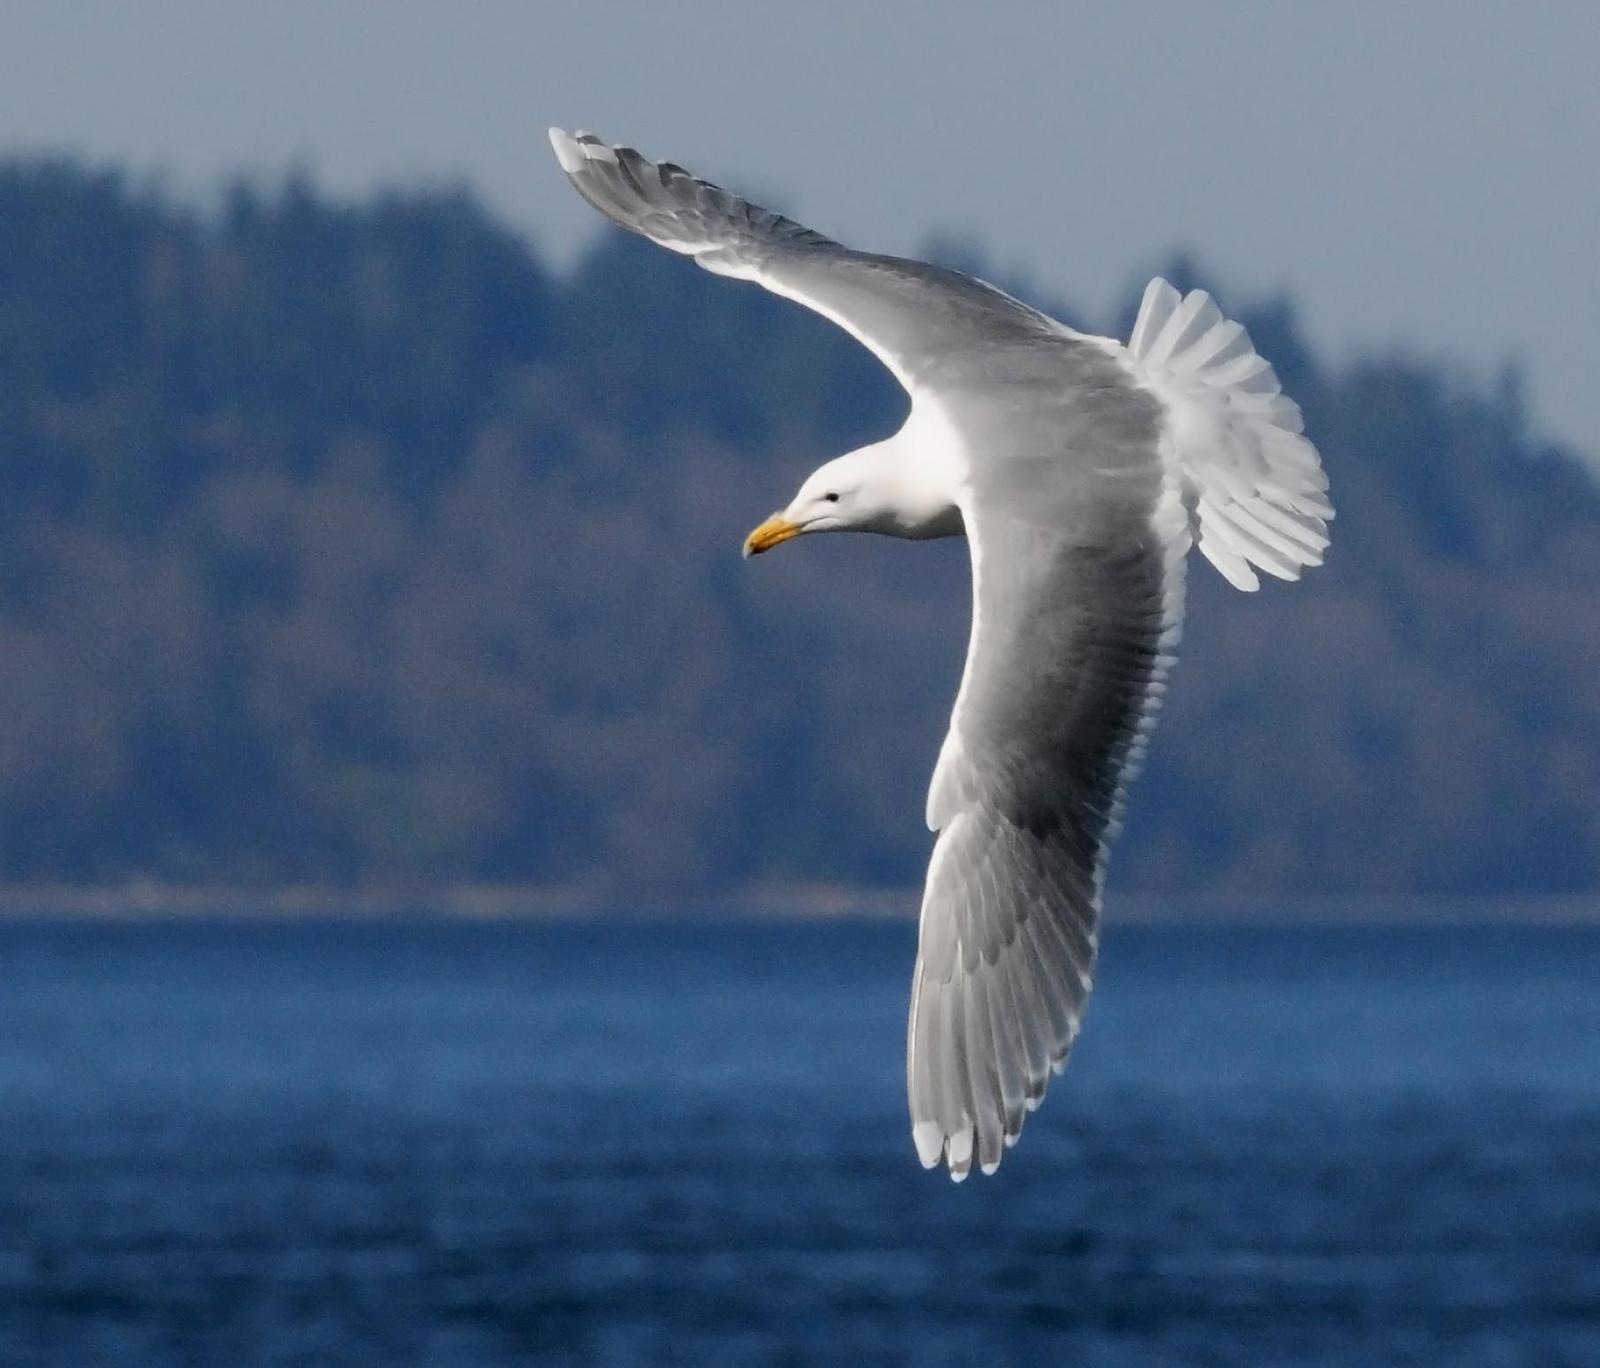 Glaucous-winged Gull Photo by Steven Mlodinow